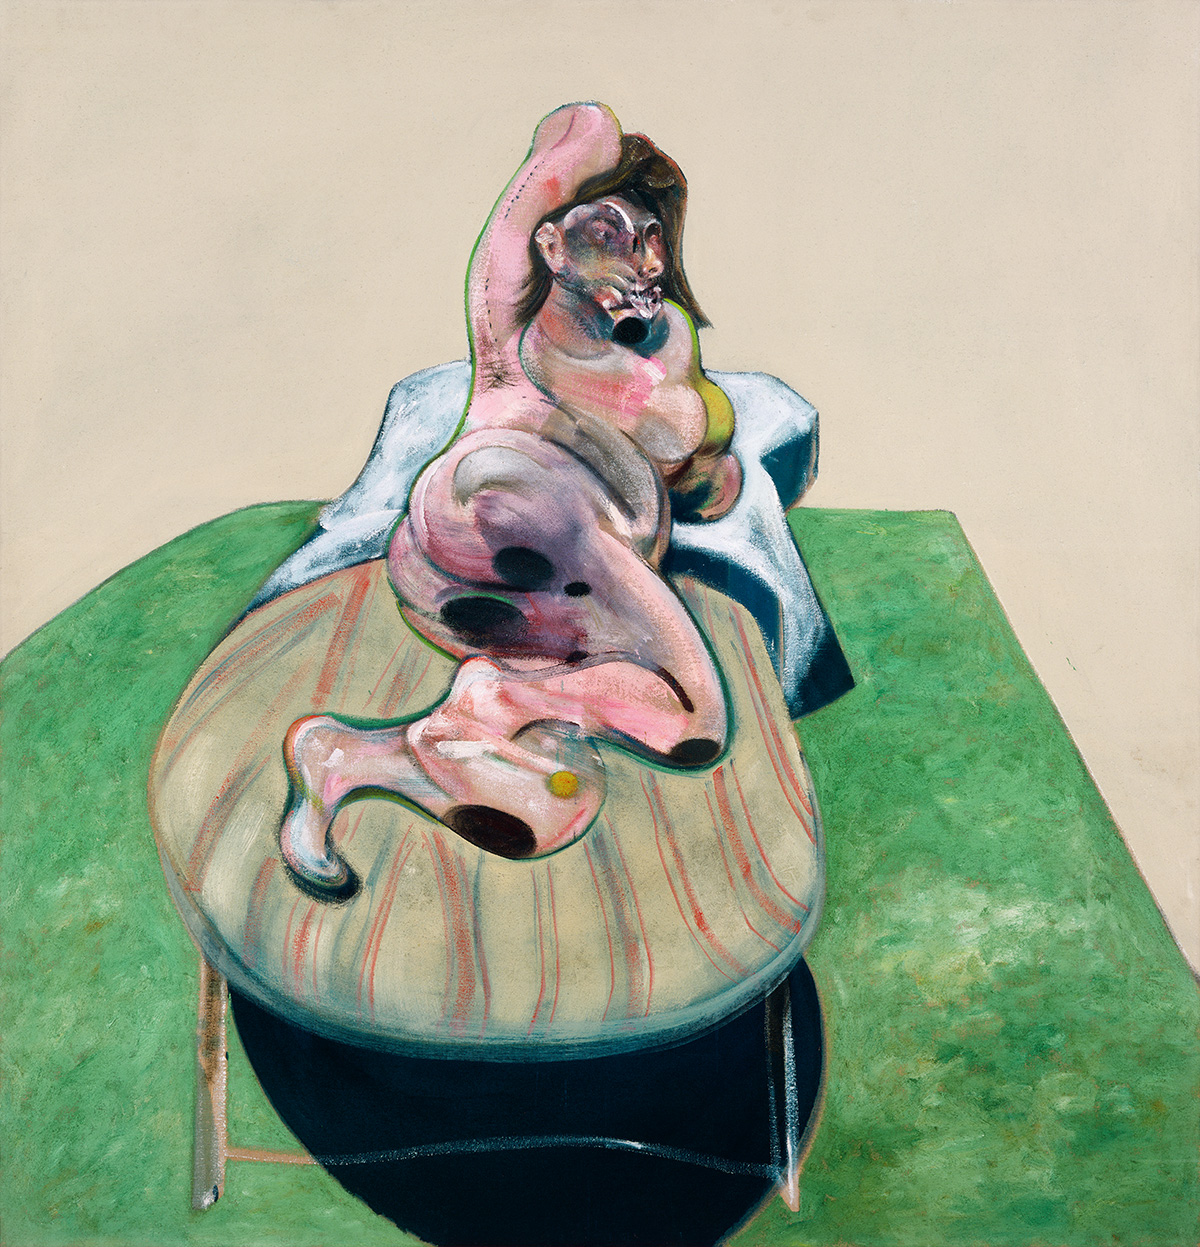 Henrietta Moraes, 1966. Oil on canvas. CR no. 66-03. © The Estate of Francis Bacon / DACS London 2023. All rights reserved.